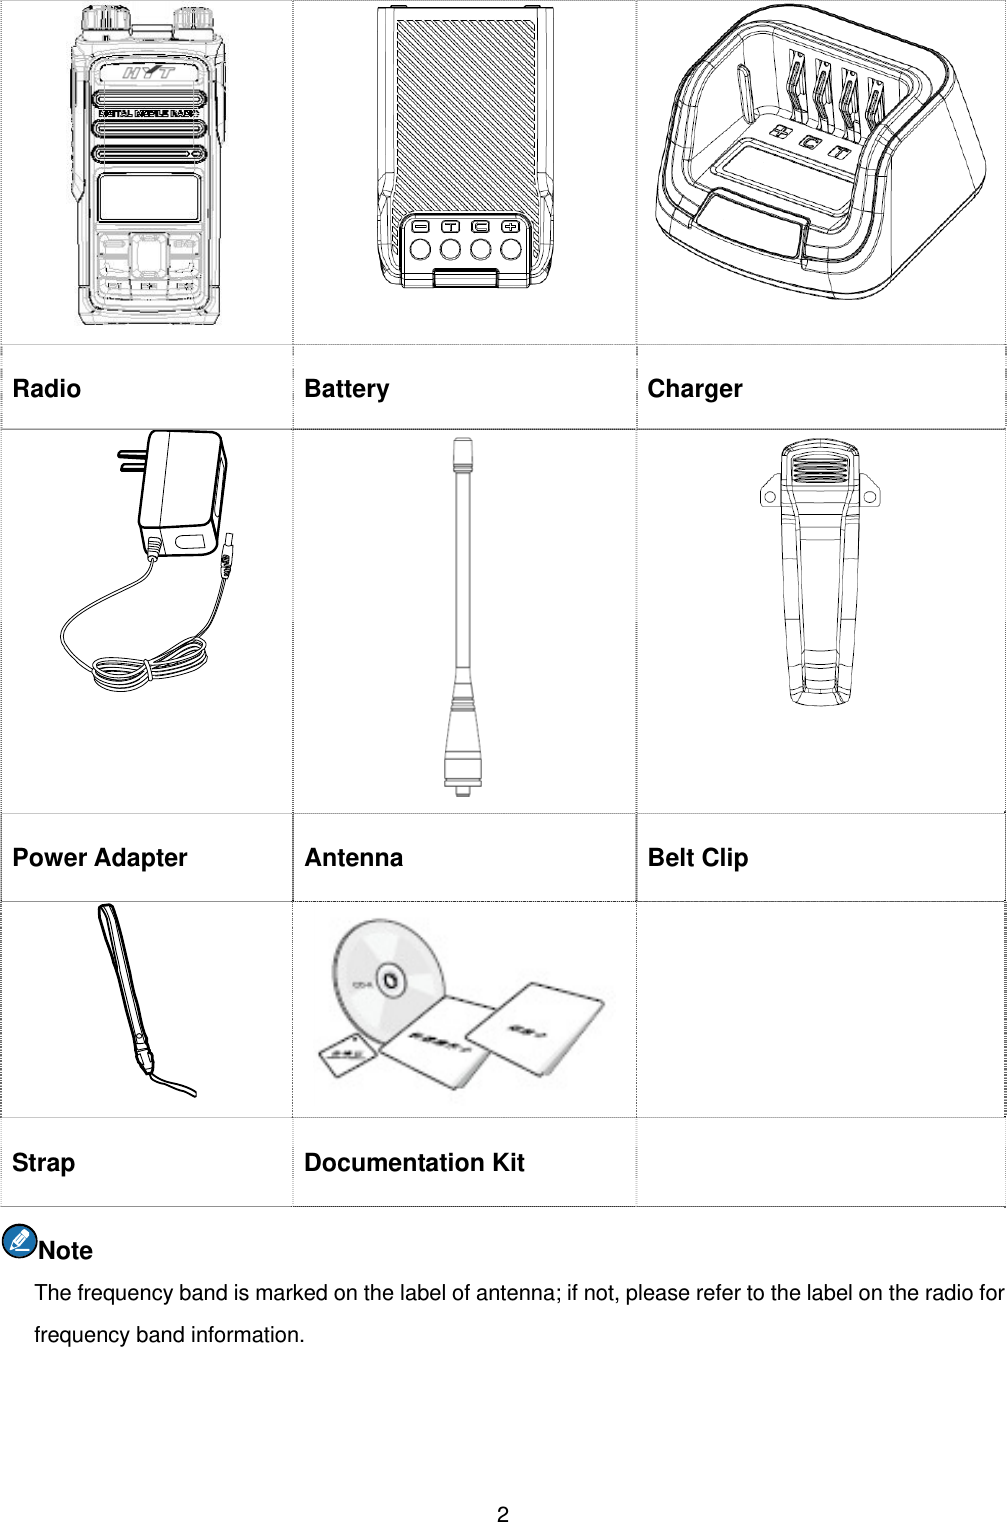  2   Radio Battery  Charger    Power Adapter  Antenna  Belt Clip    Strap Documentation Kit  Note The frequency band is marked on the label of antenna; if not, please refer to the label on the radio for frequency band information. 